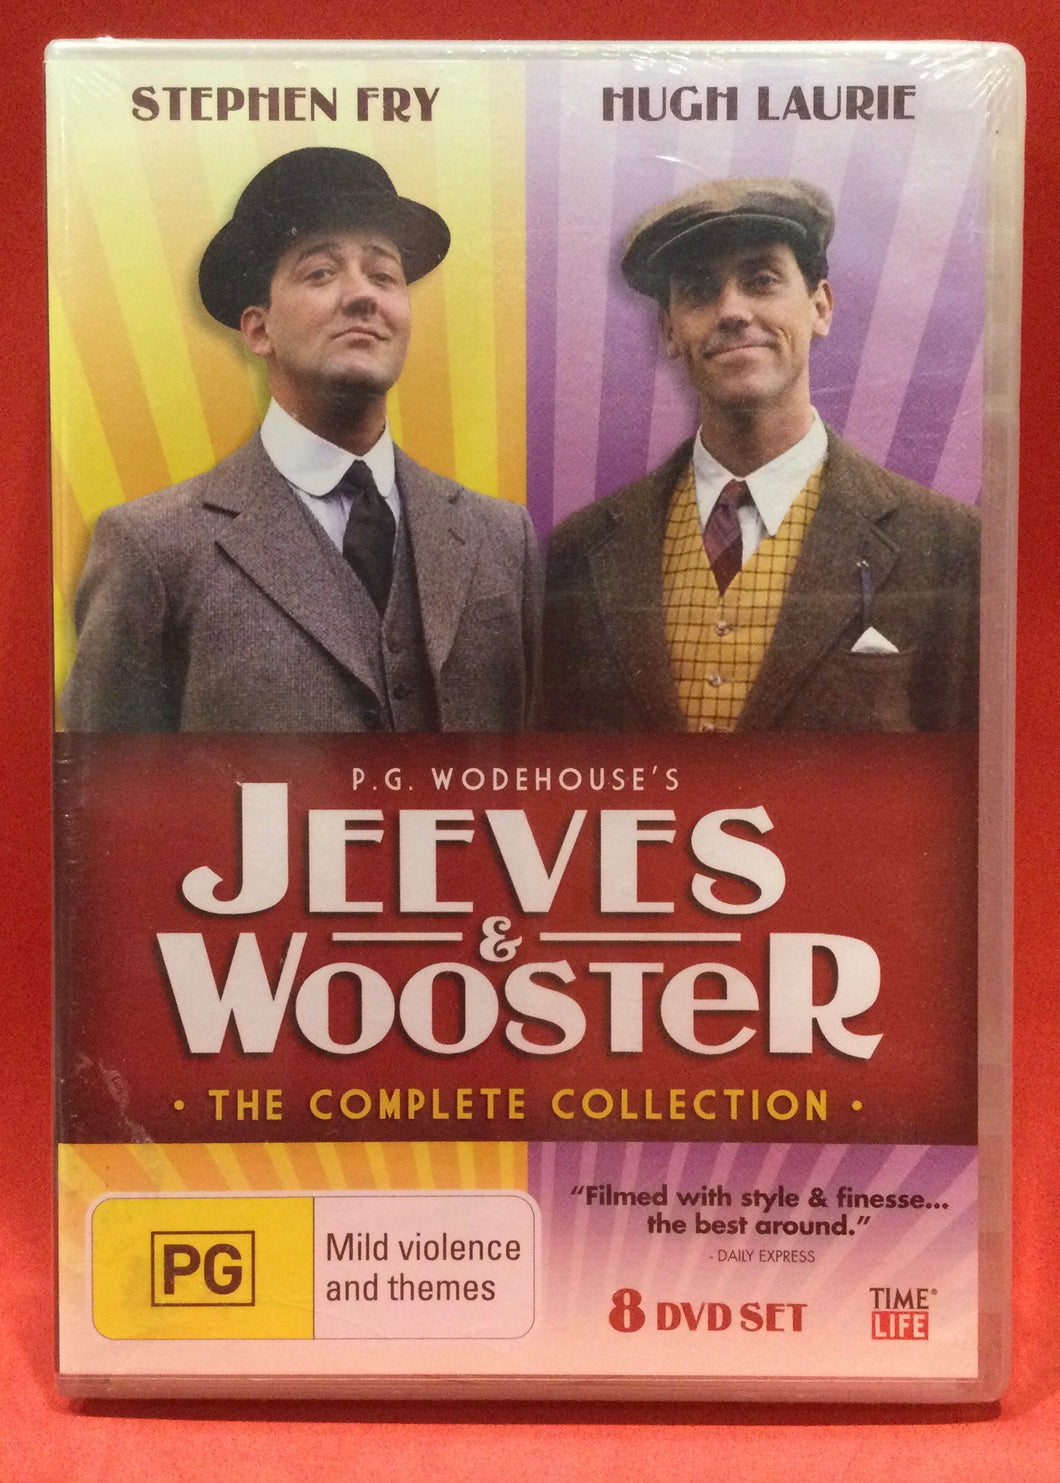 JEEVES & WOOSTER - COMPLETE COLLECTION - 8 DVD DISCS (SEALED)